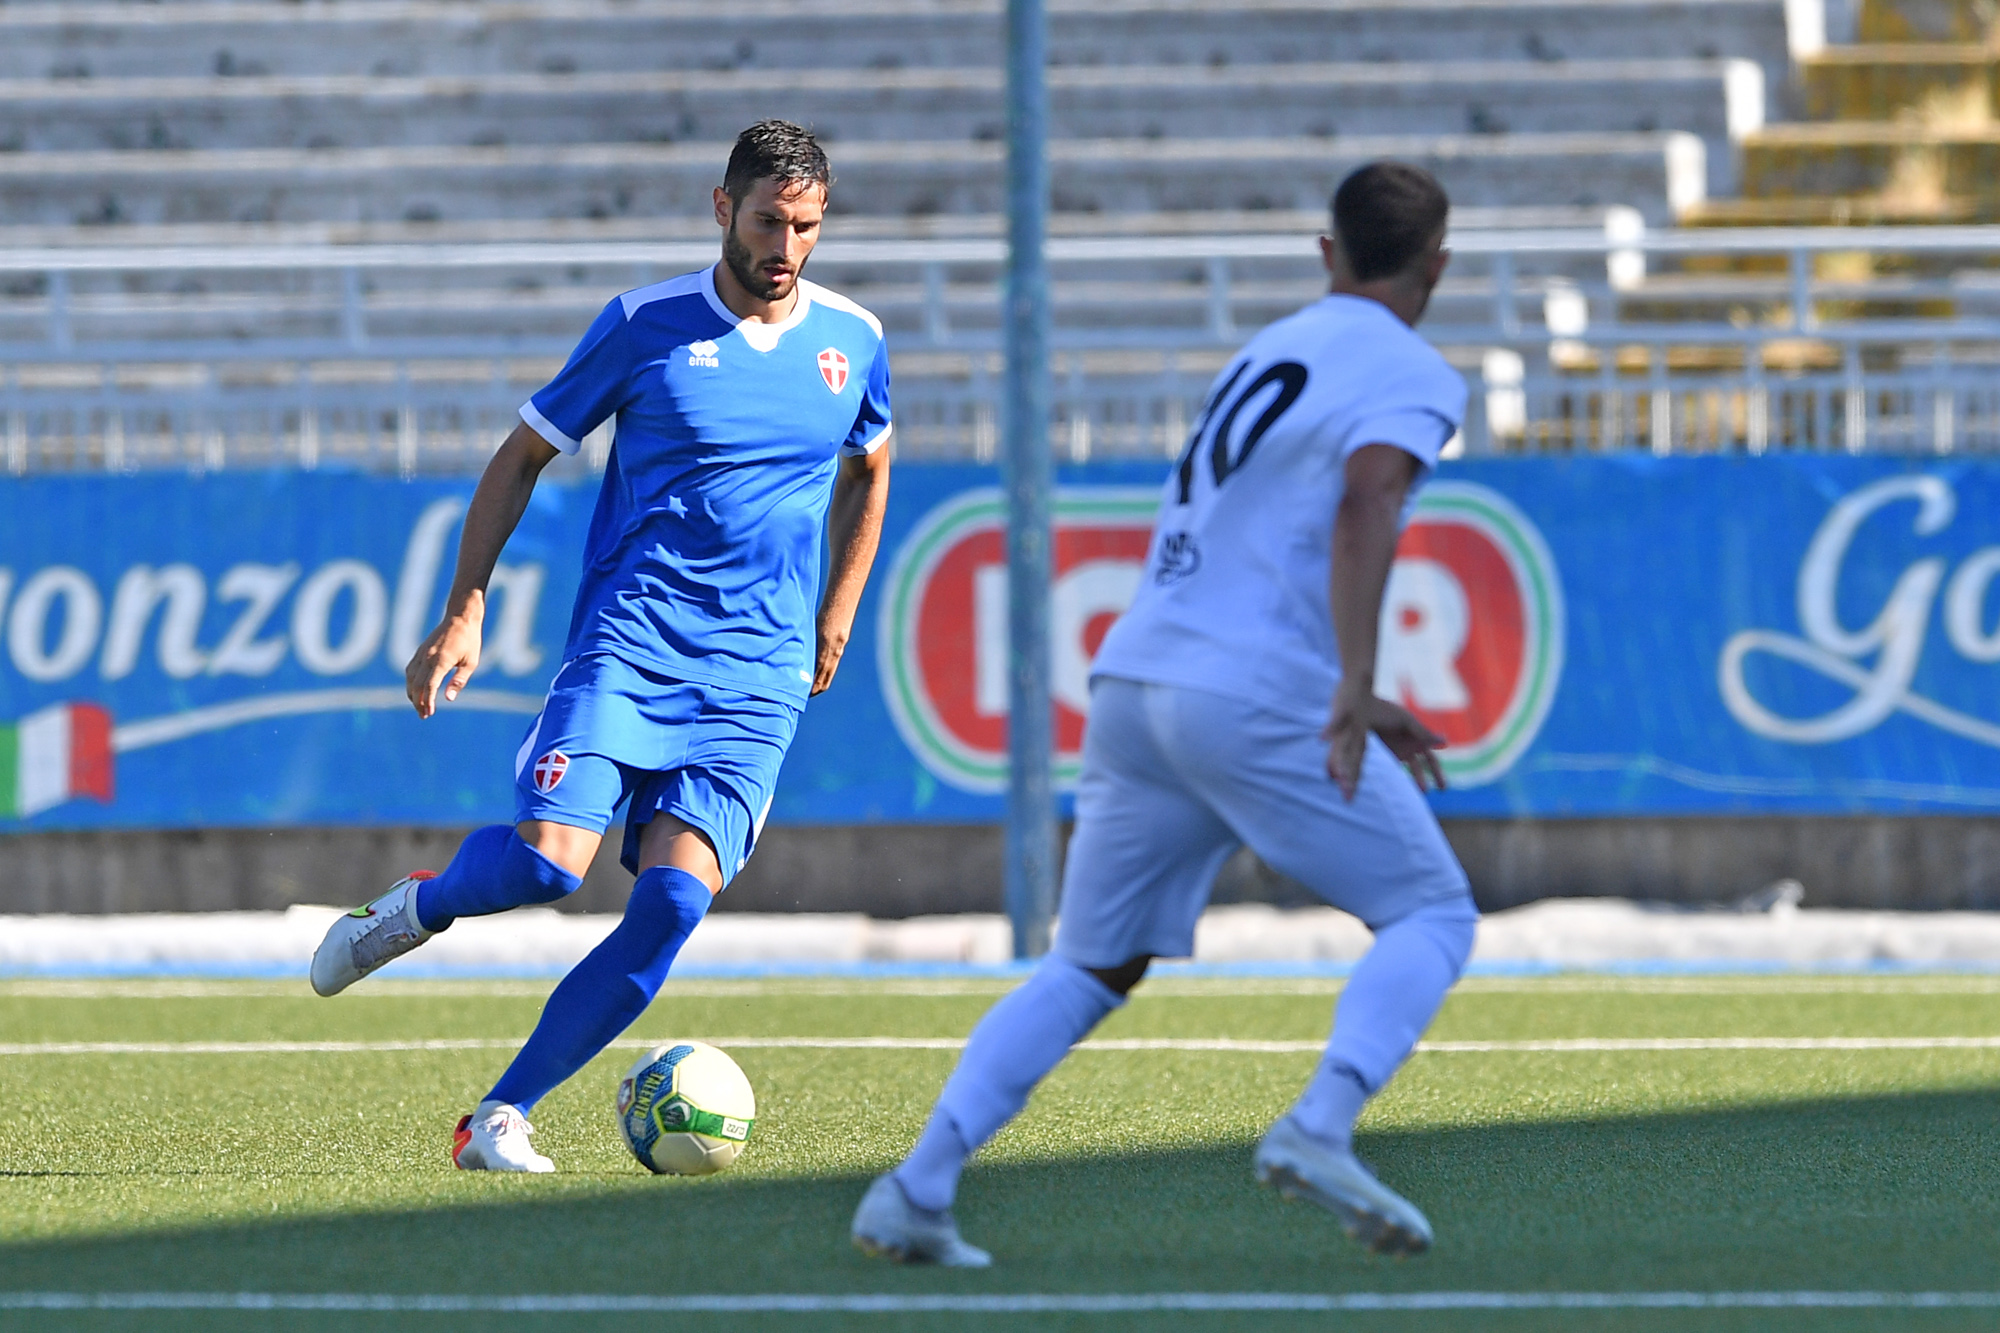 Read more about the article Novara FC vs Fiorenzuola